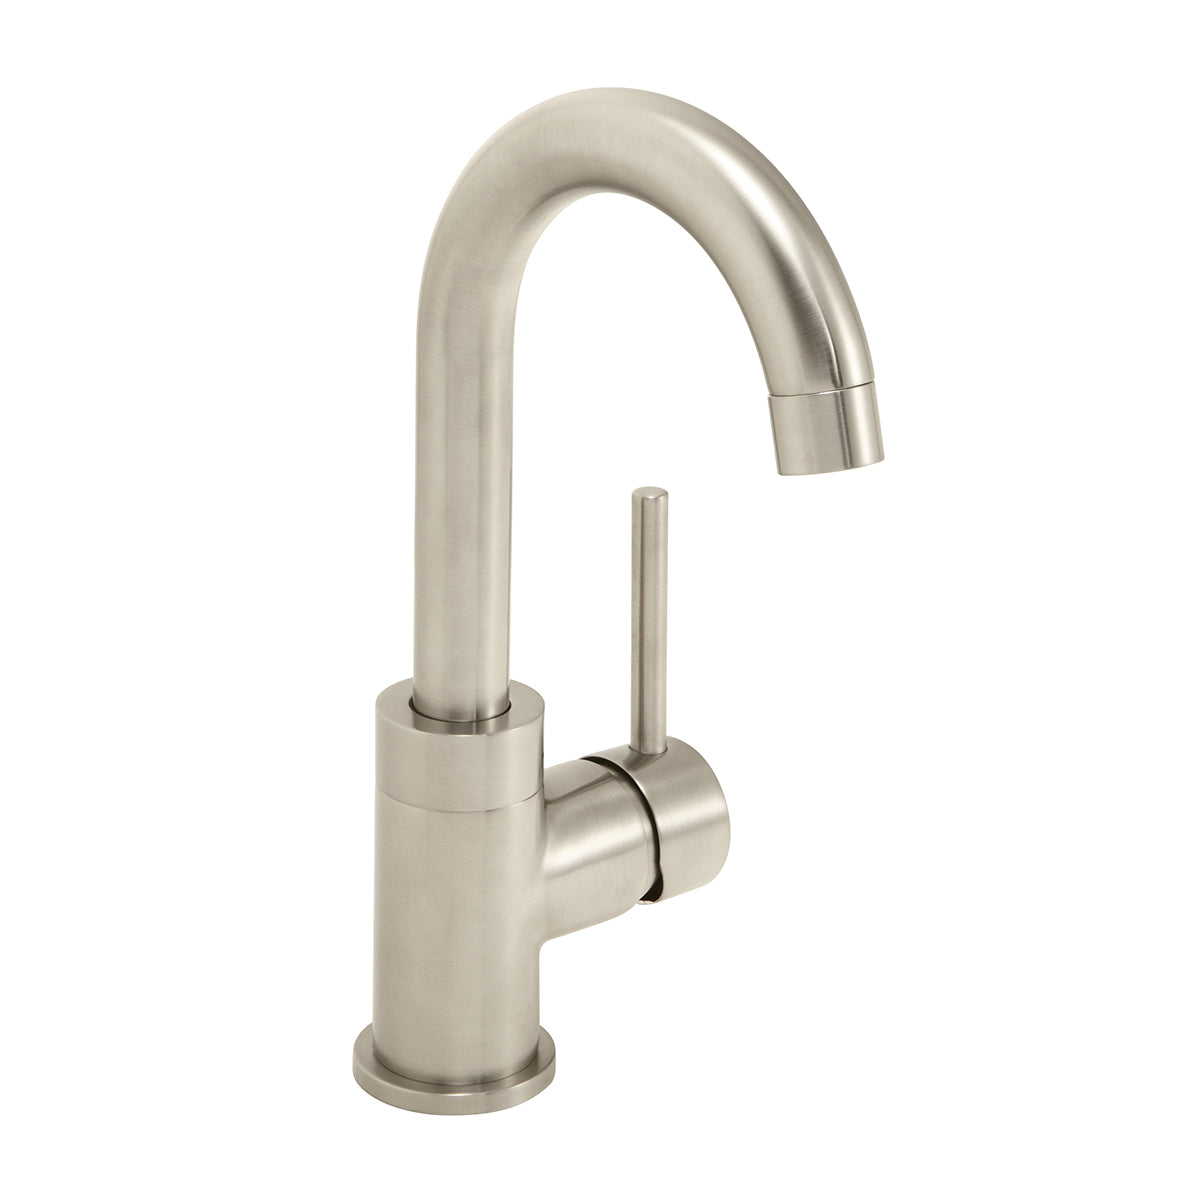 Speakman Neo Brushed Nickel 1.5 GPM Single Lever Handle Bar Faucet